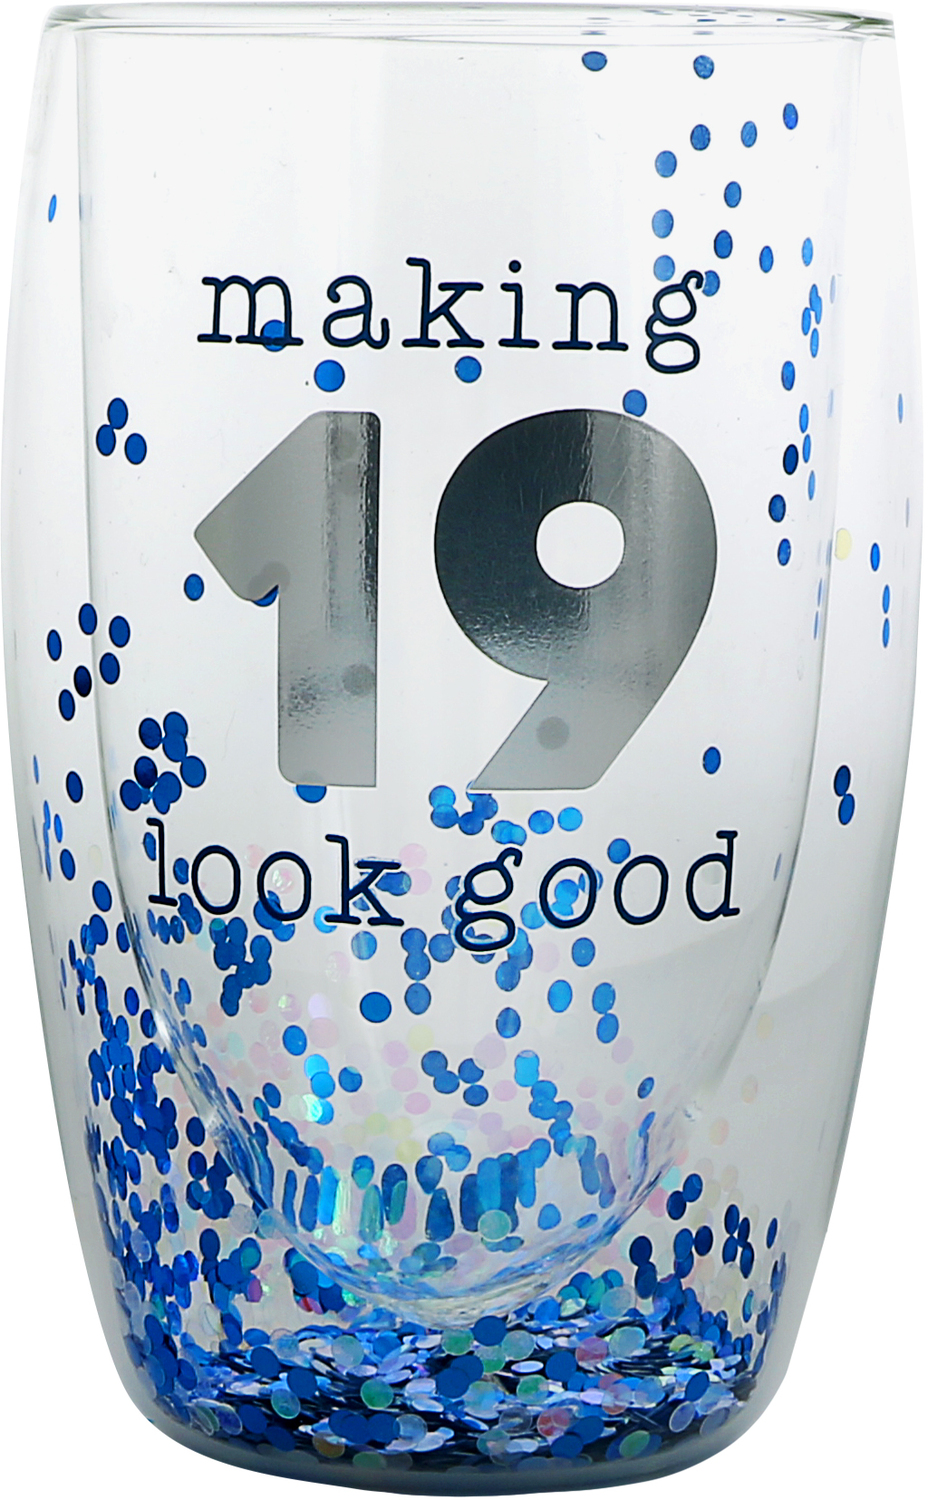 19 Look Good by Happy Confetti to You - 19 Look Good - 14 oz Double-Walled Glass